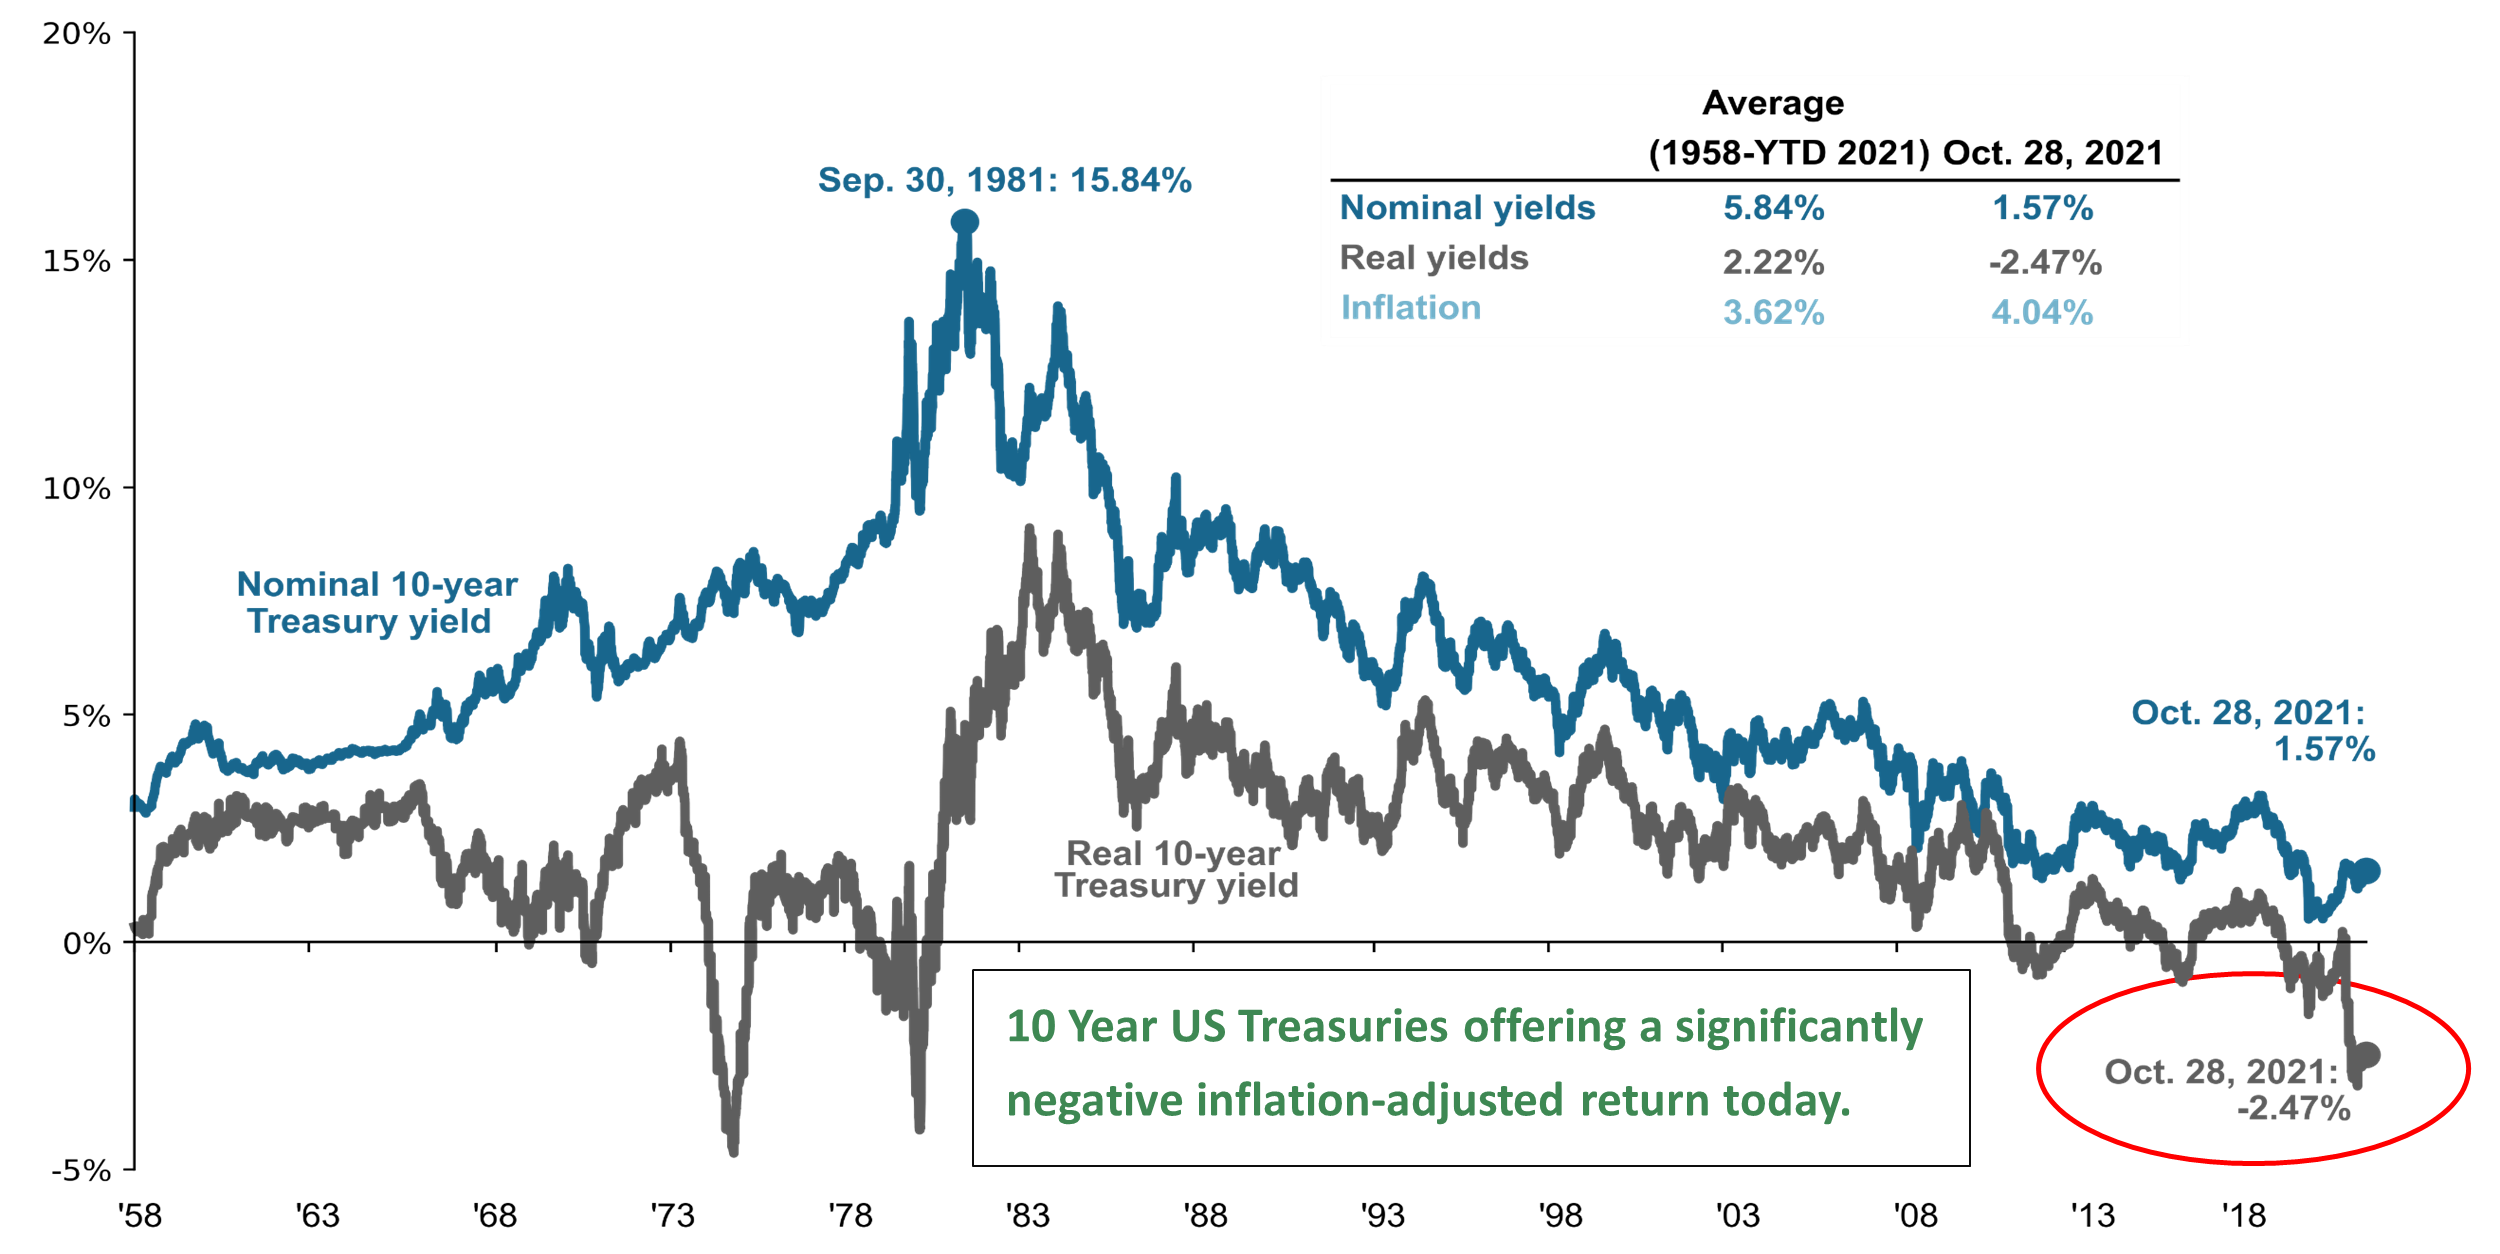 Line graph depicting Nominal 10-year Treasury yield and Real 10-year Treasury yield from 1958 to October 28, 2021 with text that reads: 10 Year US Treasuries offering a significantly negative inflation-adjusted return today.